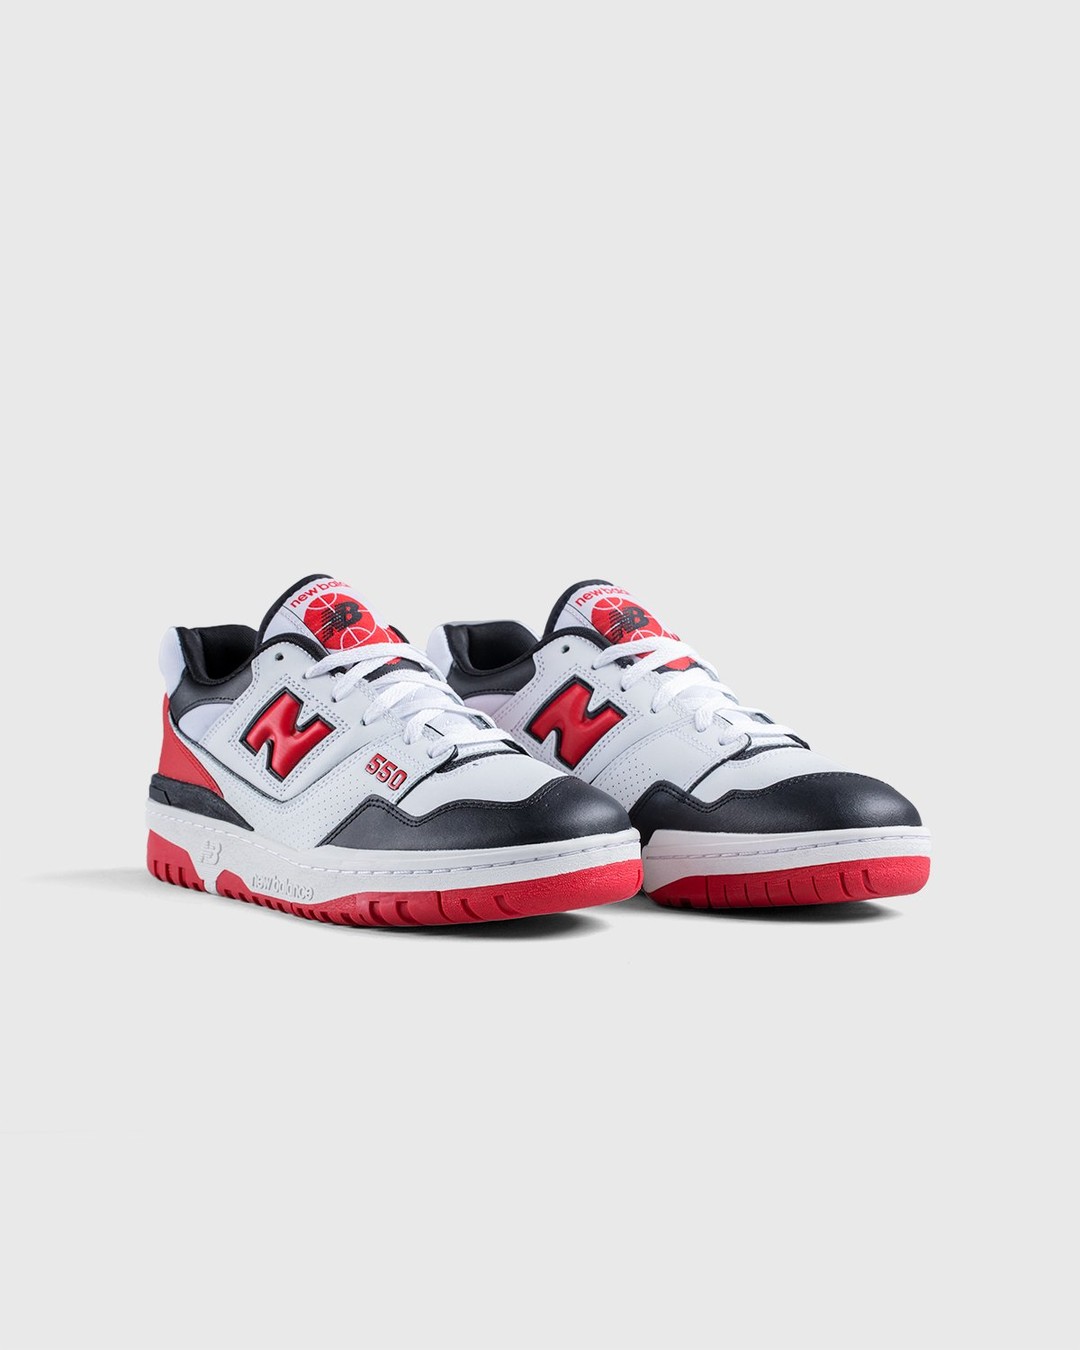 New Balance – BB550HR1 White Red Black - Low Top Sneakers - White - Image 3